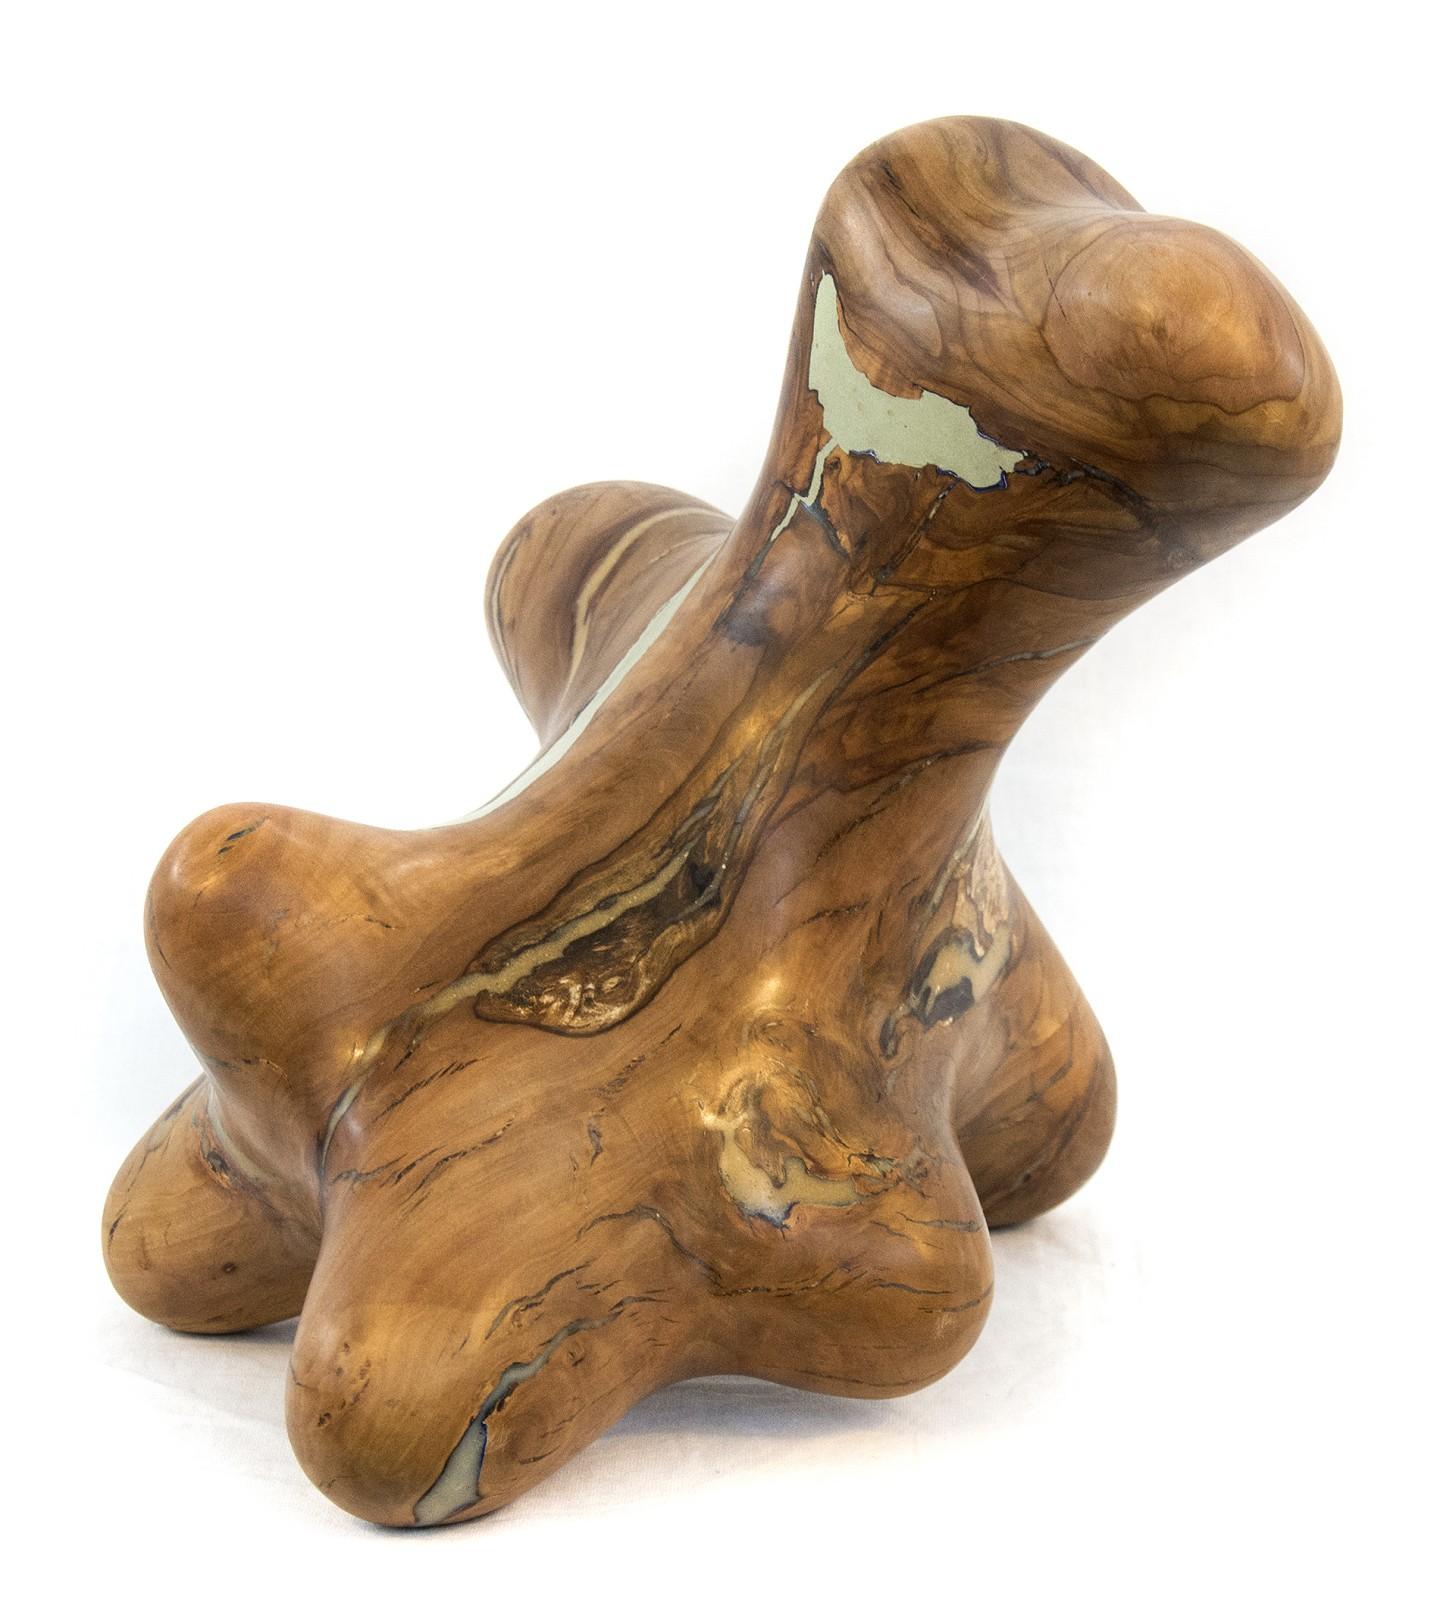 Windfall Series No 06 - smooth, polished, natural wood abstract carved sculpture